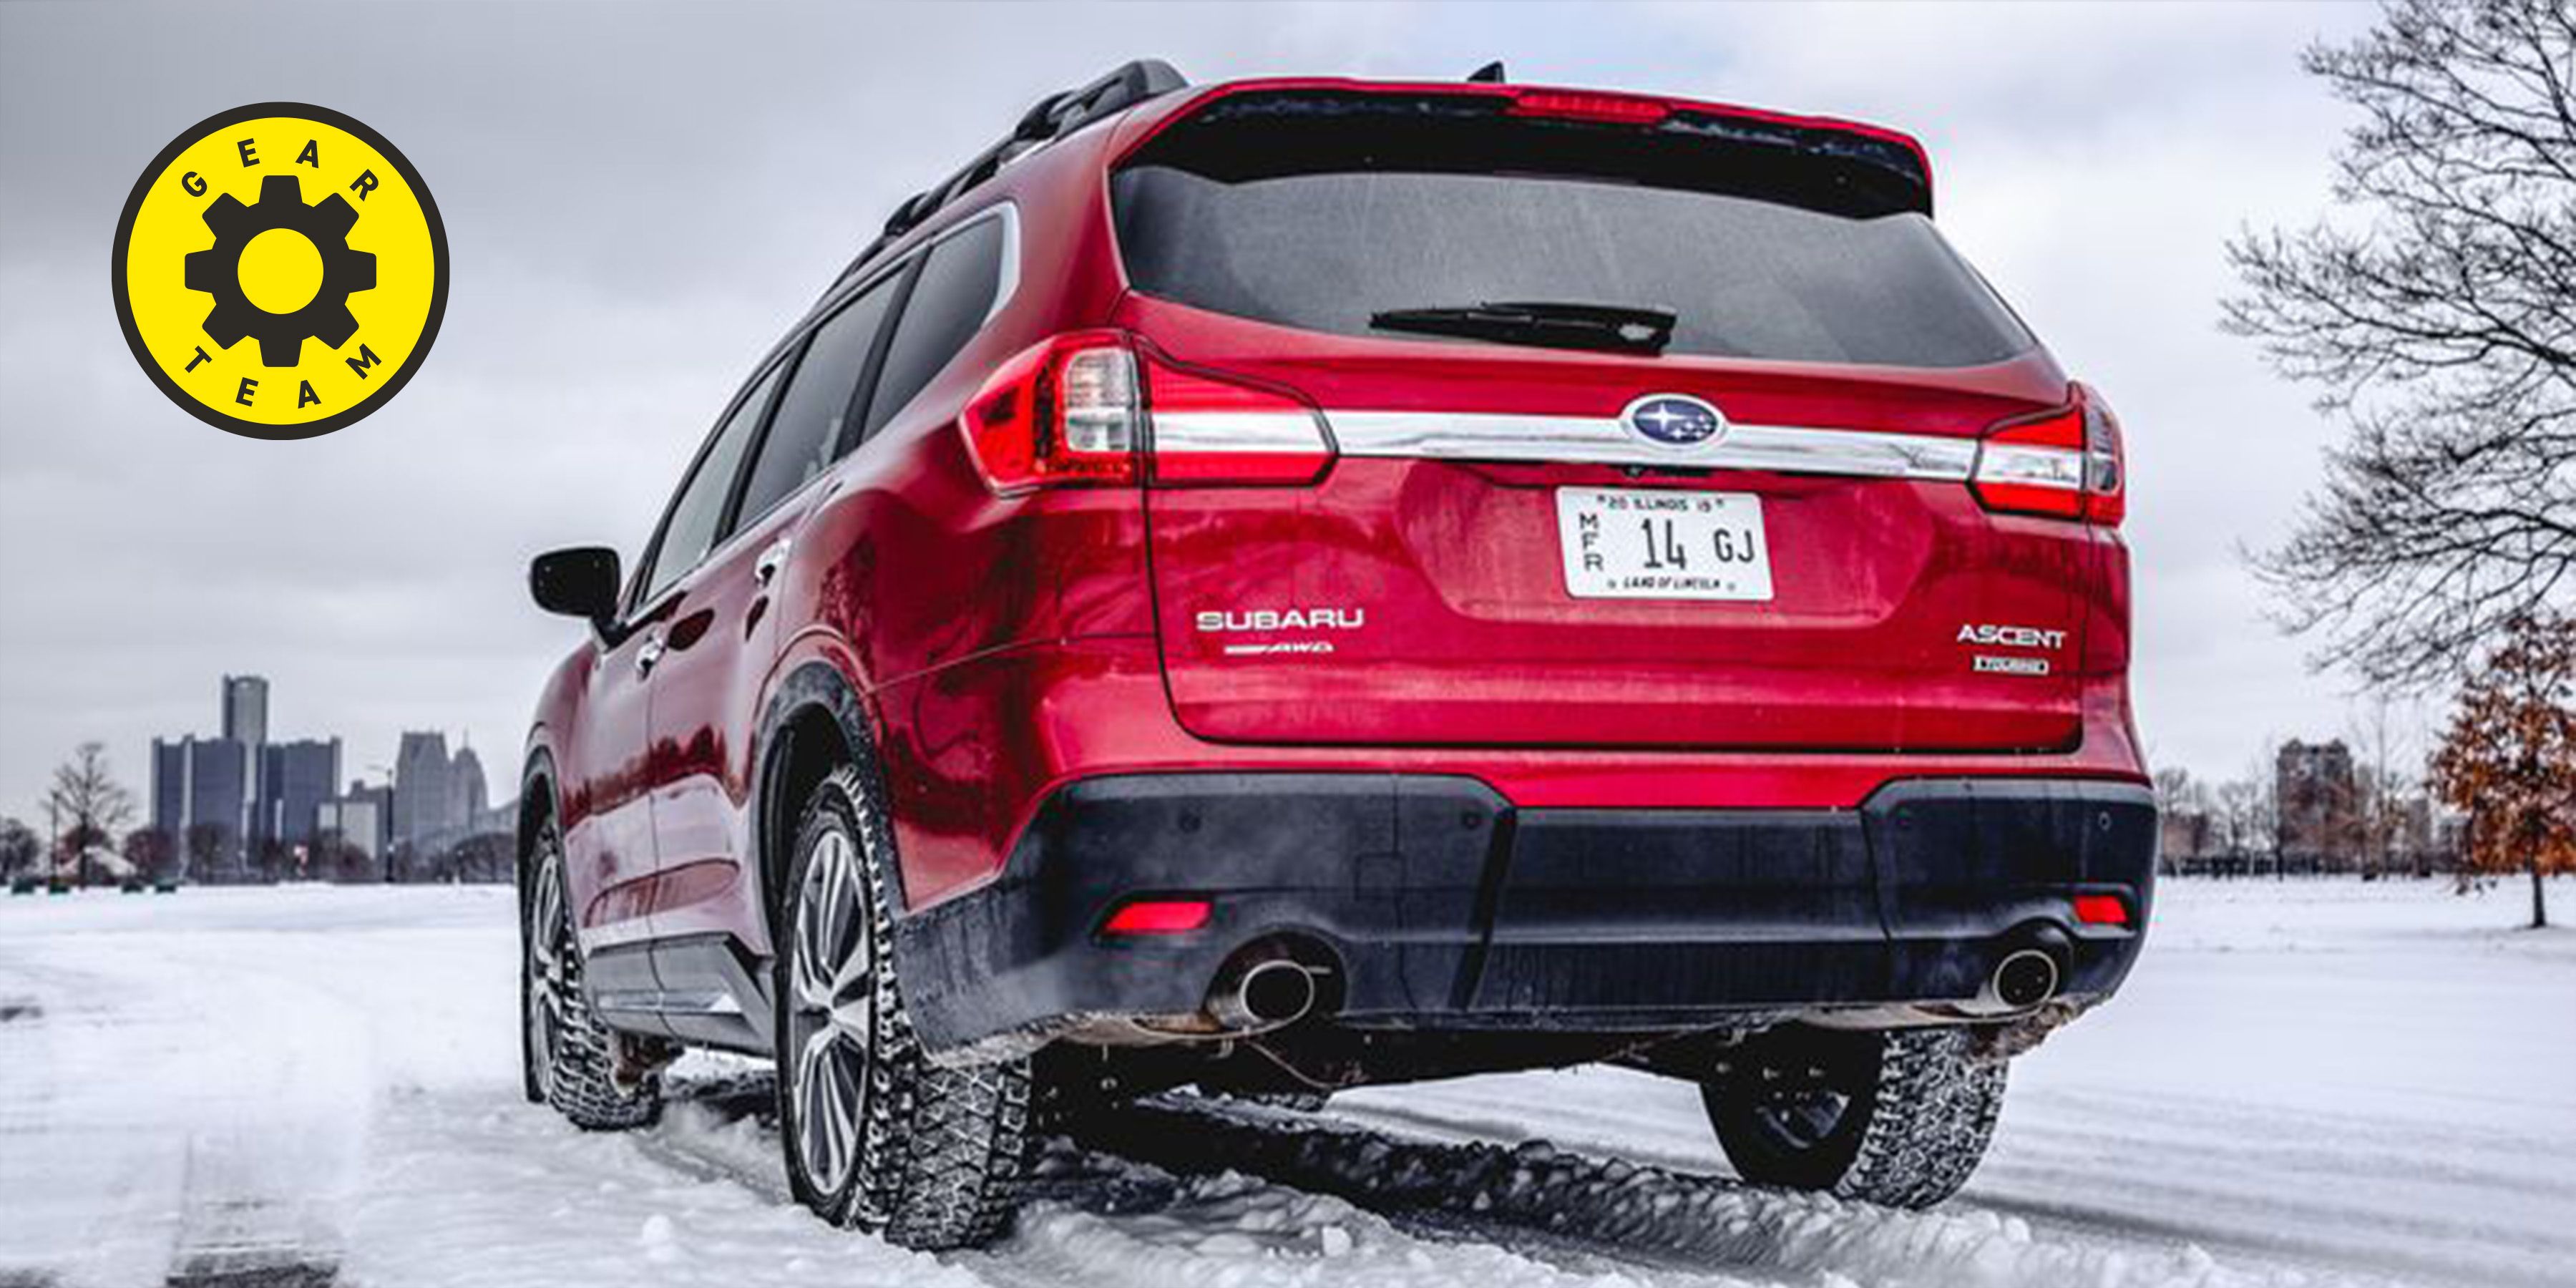 Best Winter Tires for Safer Driving in Snow and Ice - Car and Driver